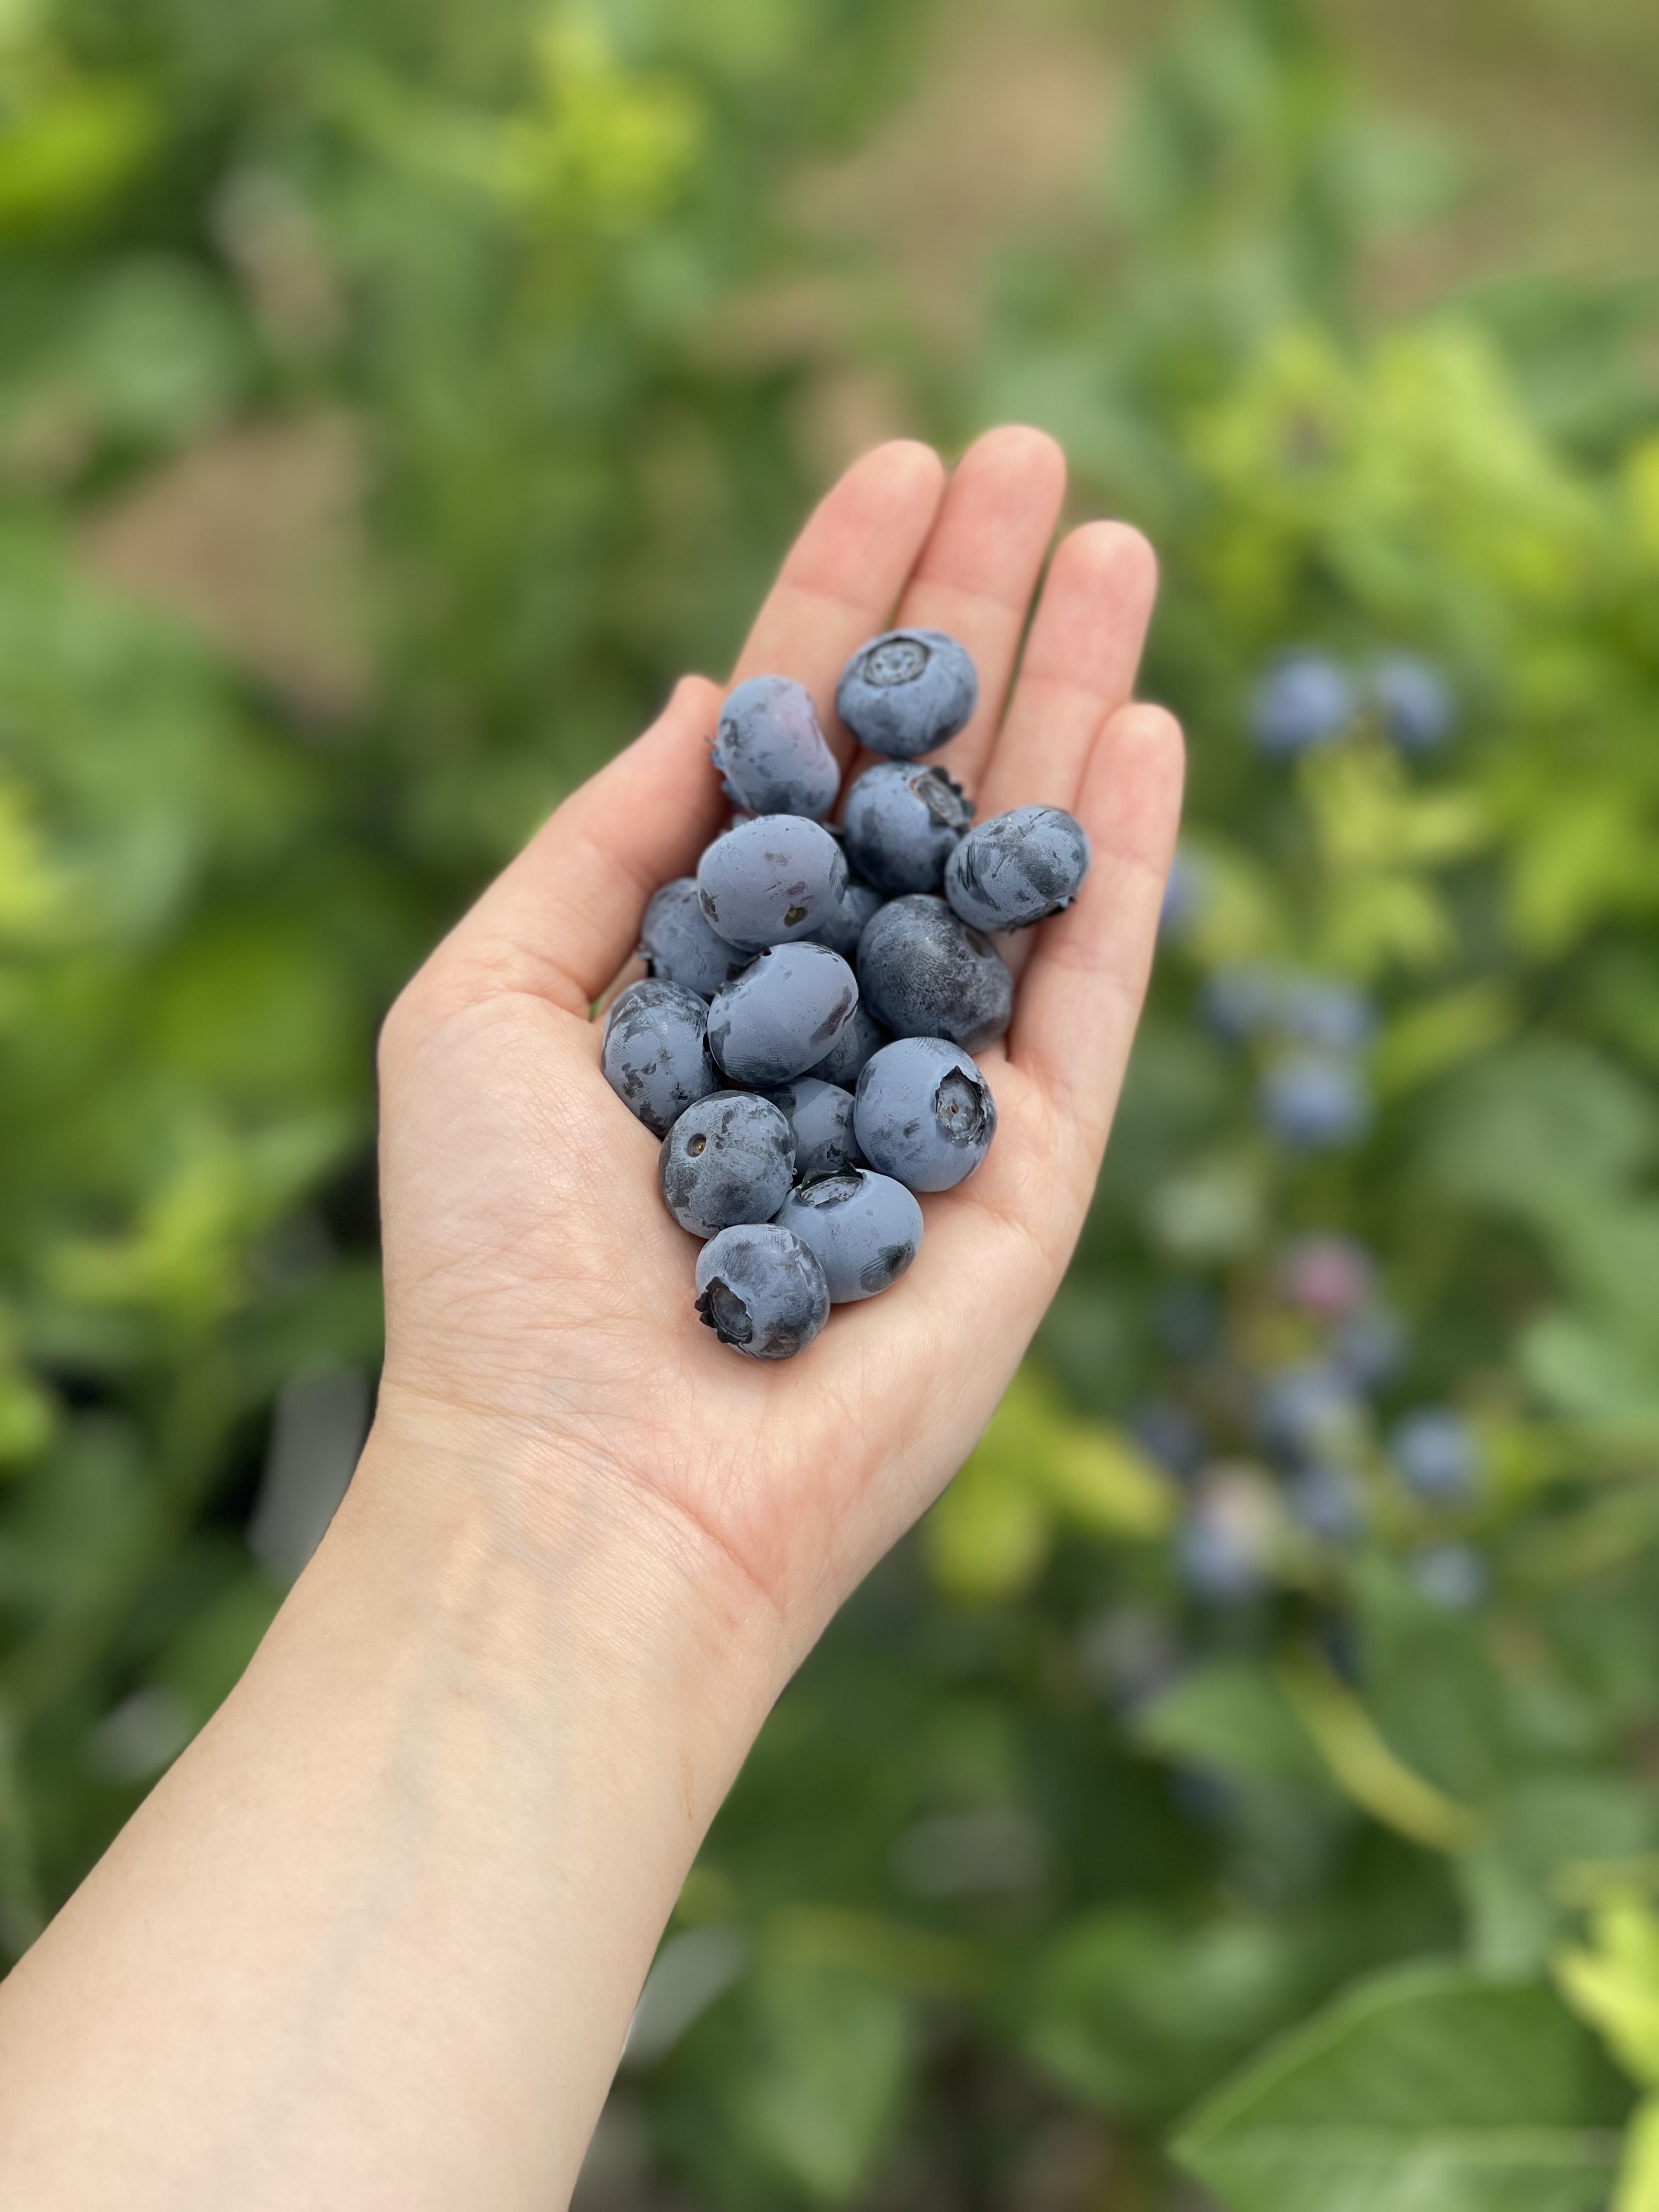 Bluberries in hand